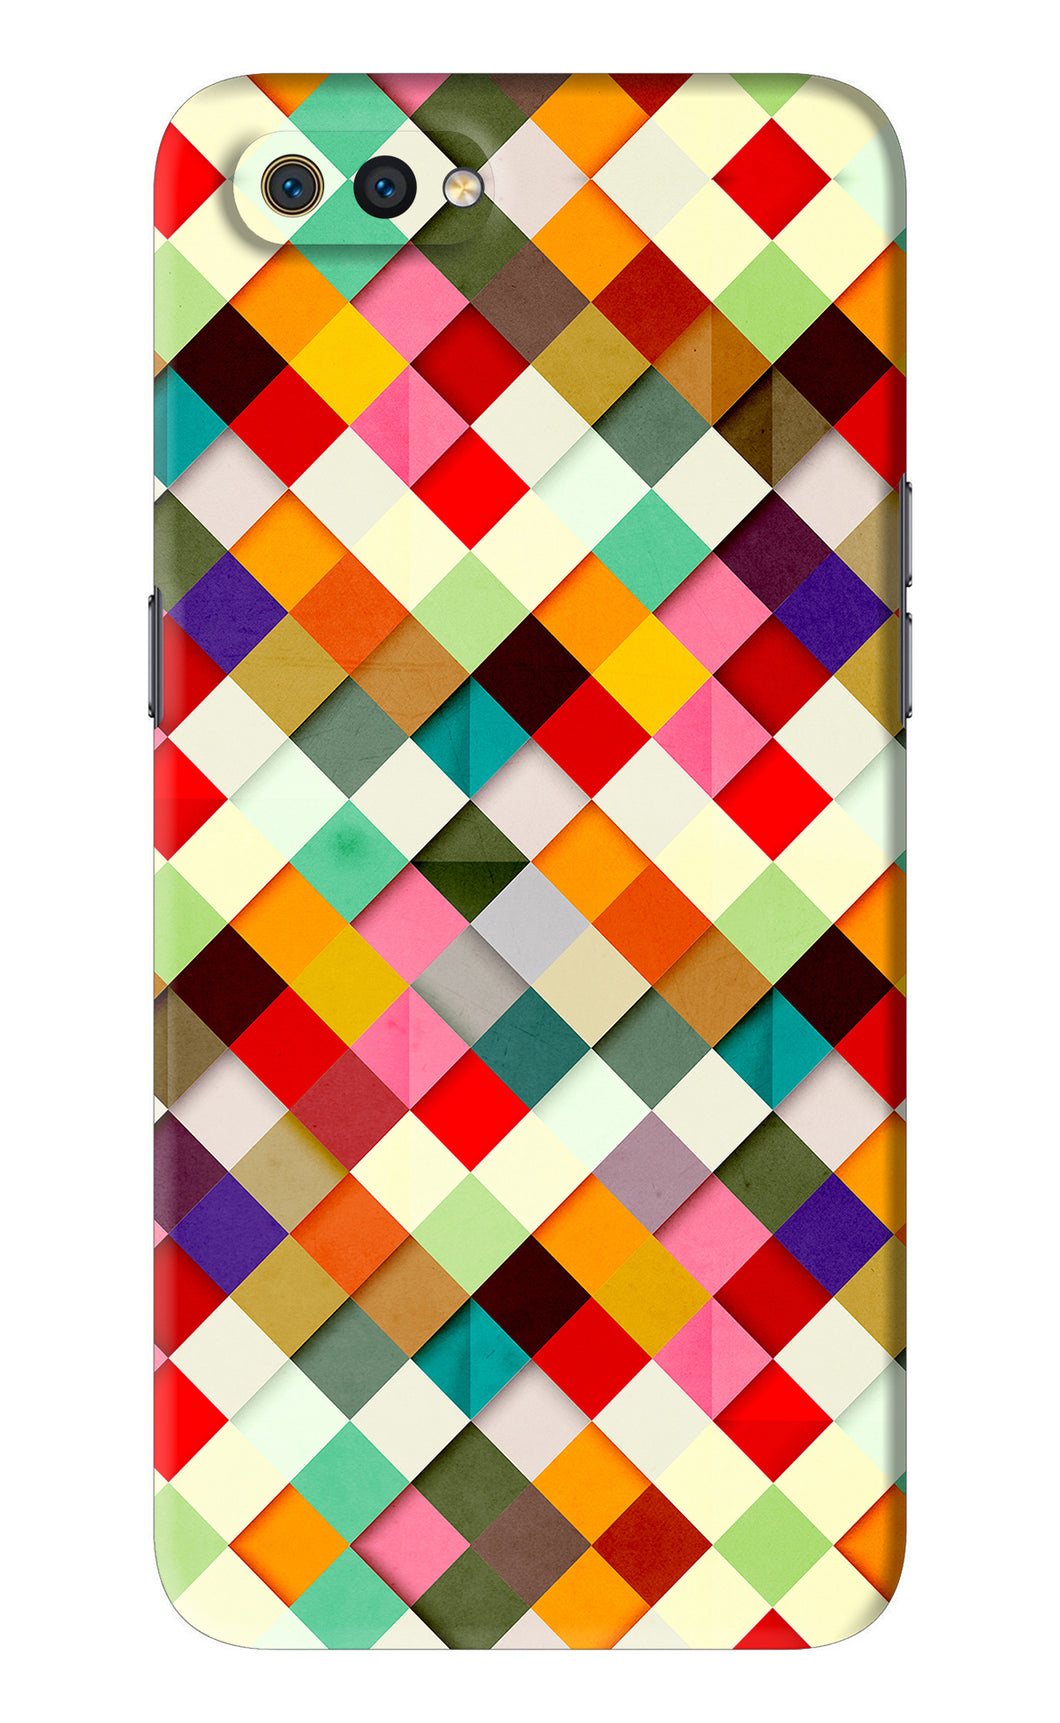 Geometric Abstract Colorful Realme C2 Back Skin Wrap